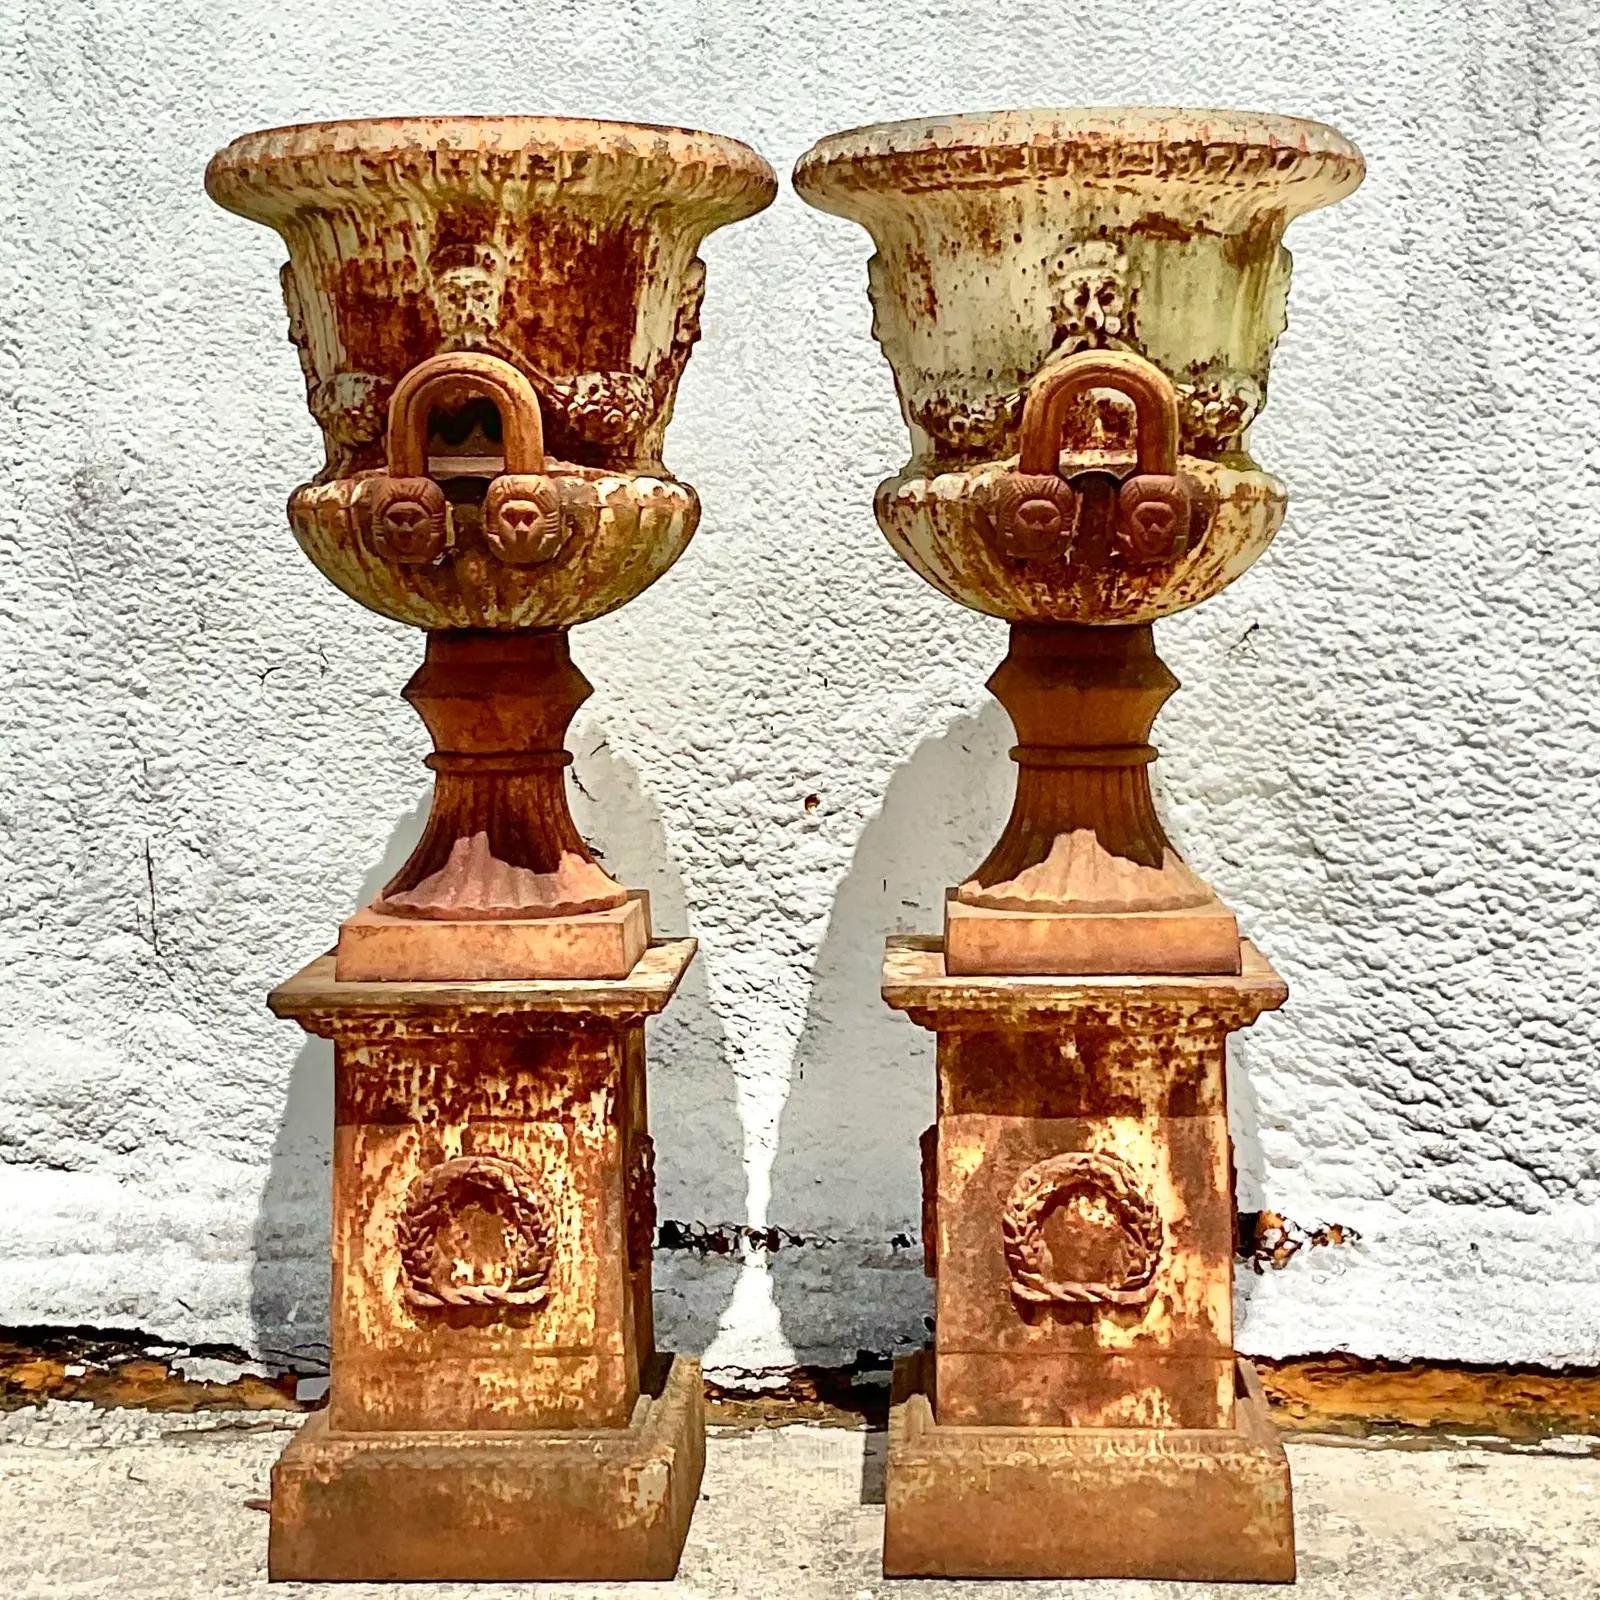 North American Vintage Monumental Wrought Iron Urns - a Pair For Sale